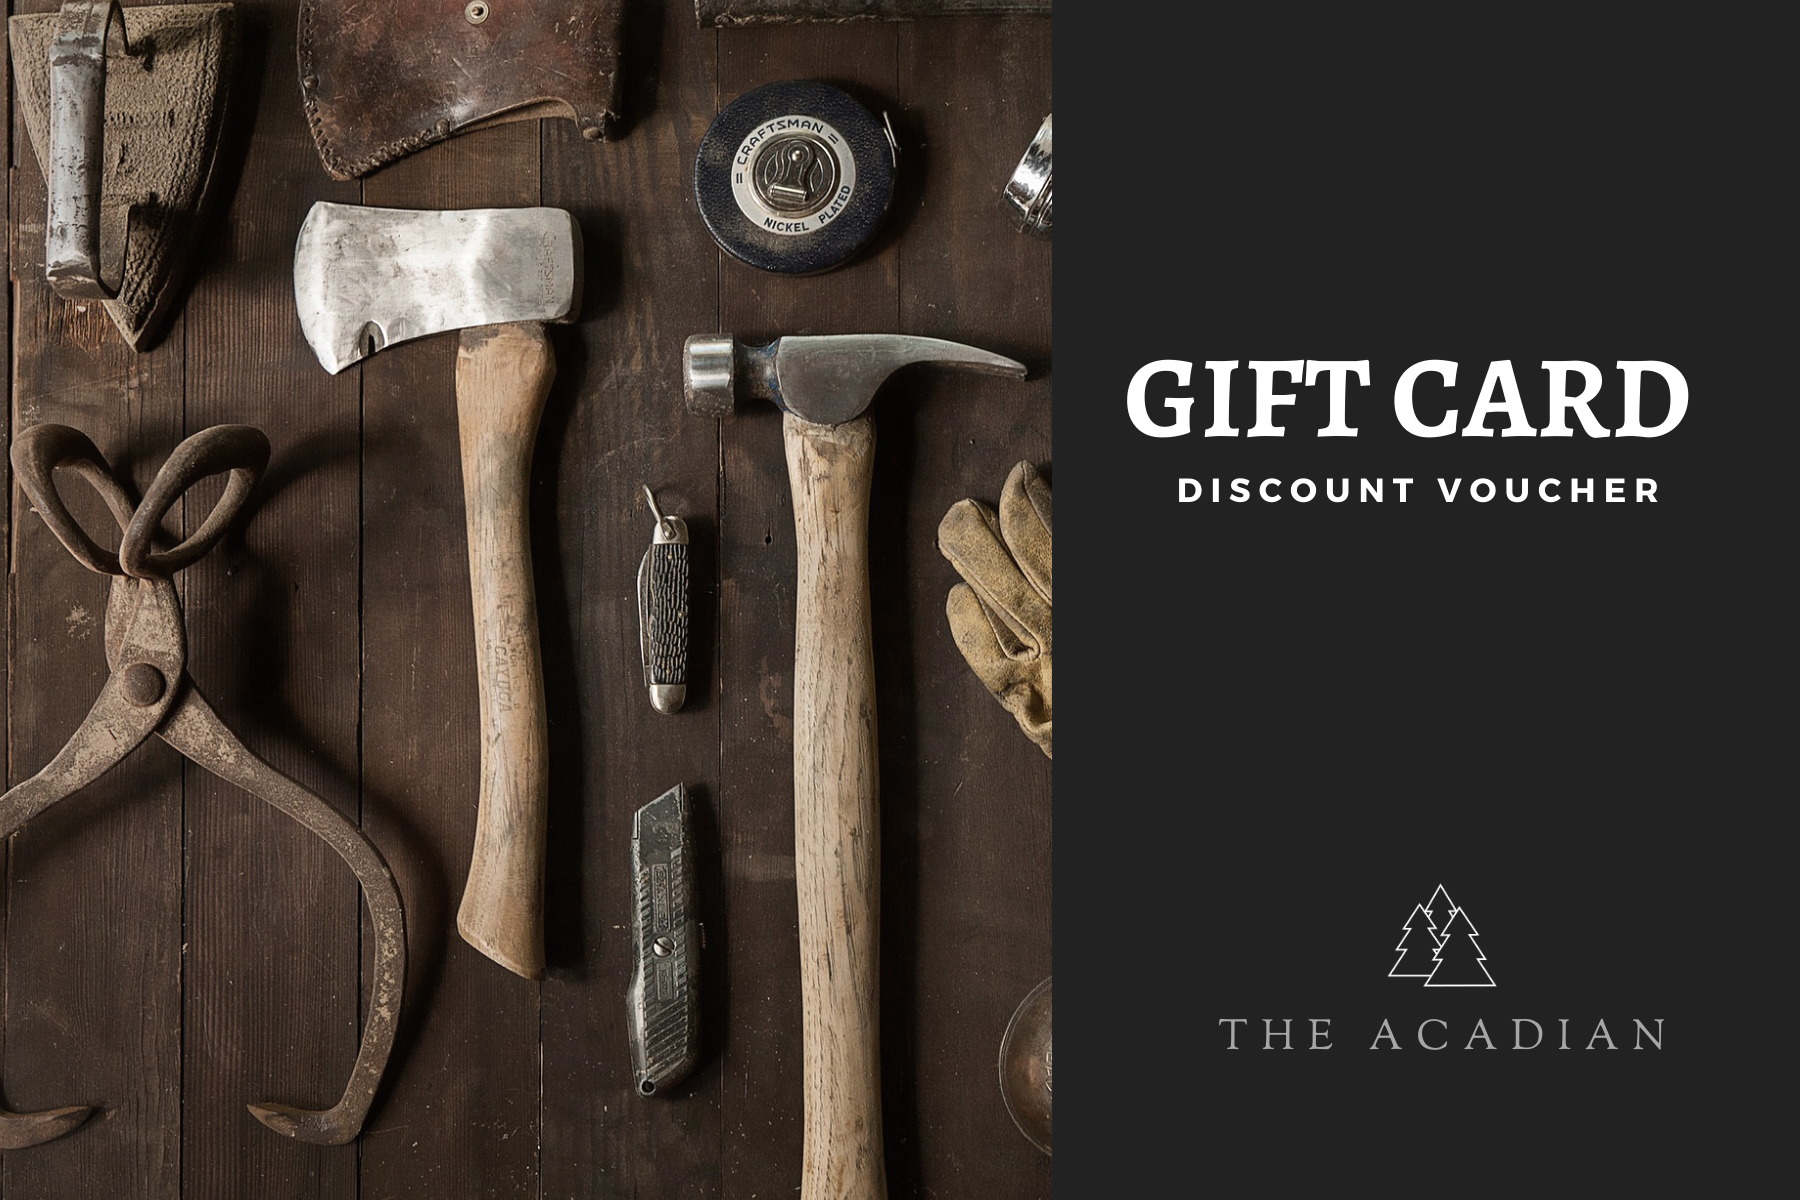 The Acadian Gift Card